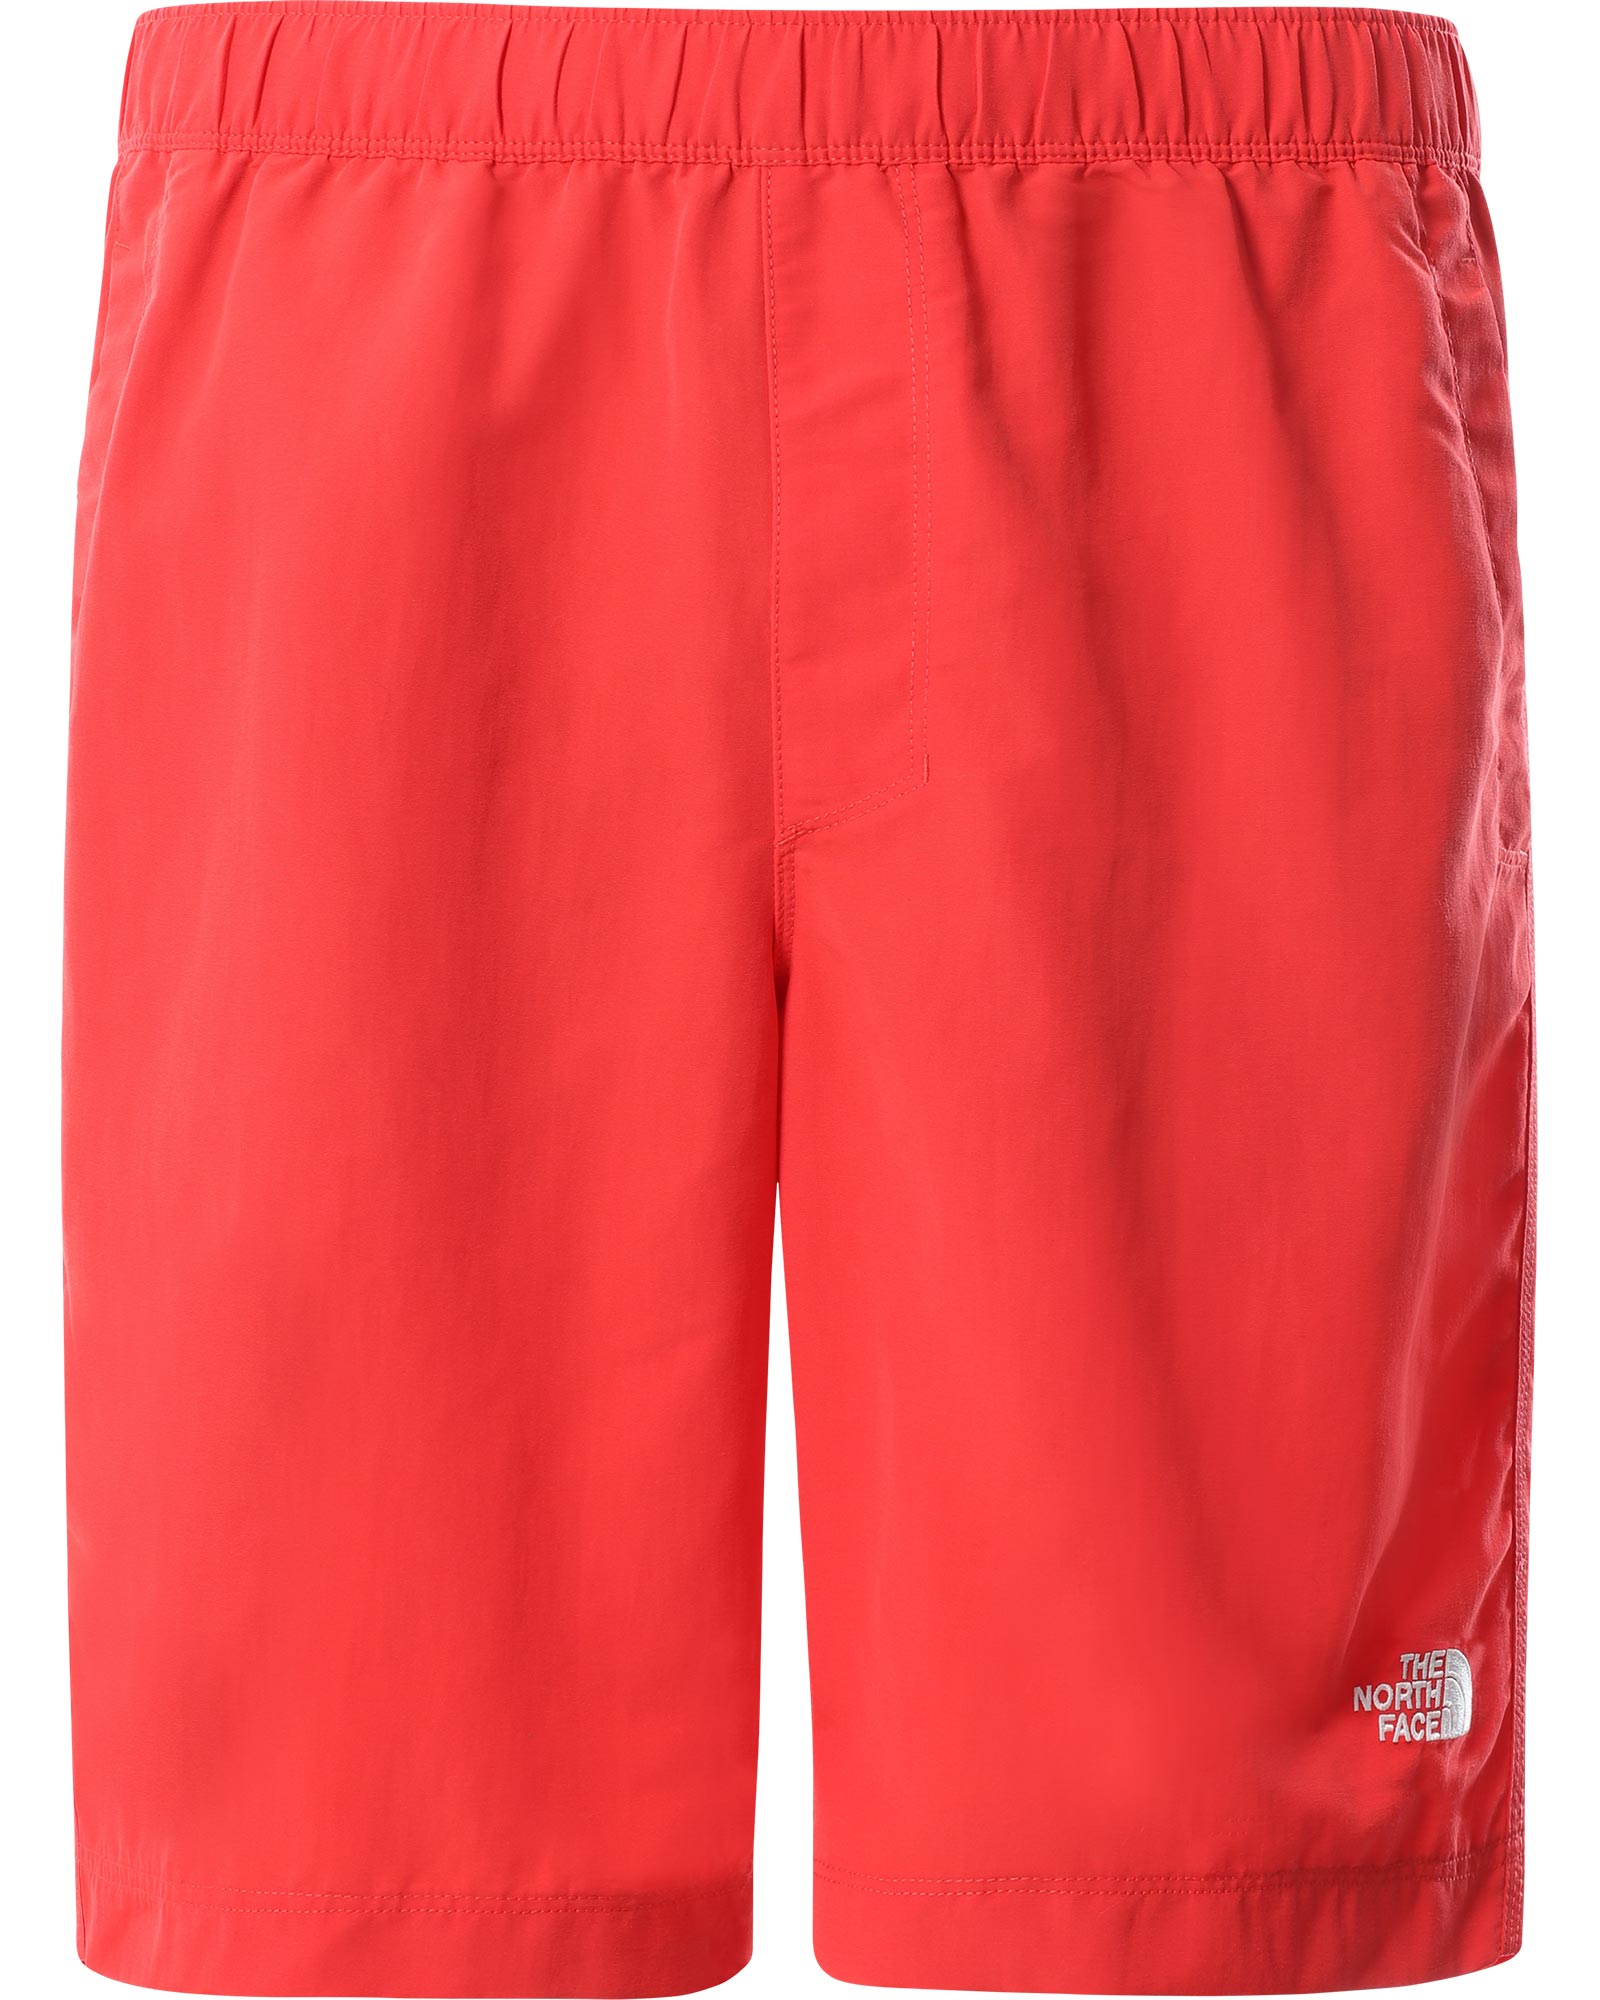 The North Face Class V Water Men’s Shorts - Horizon Red S